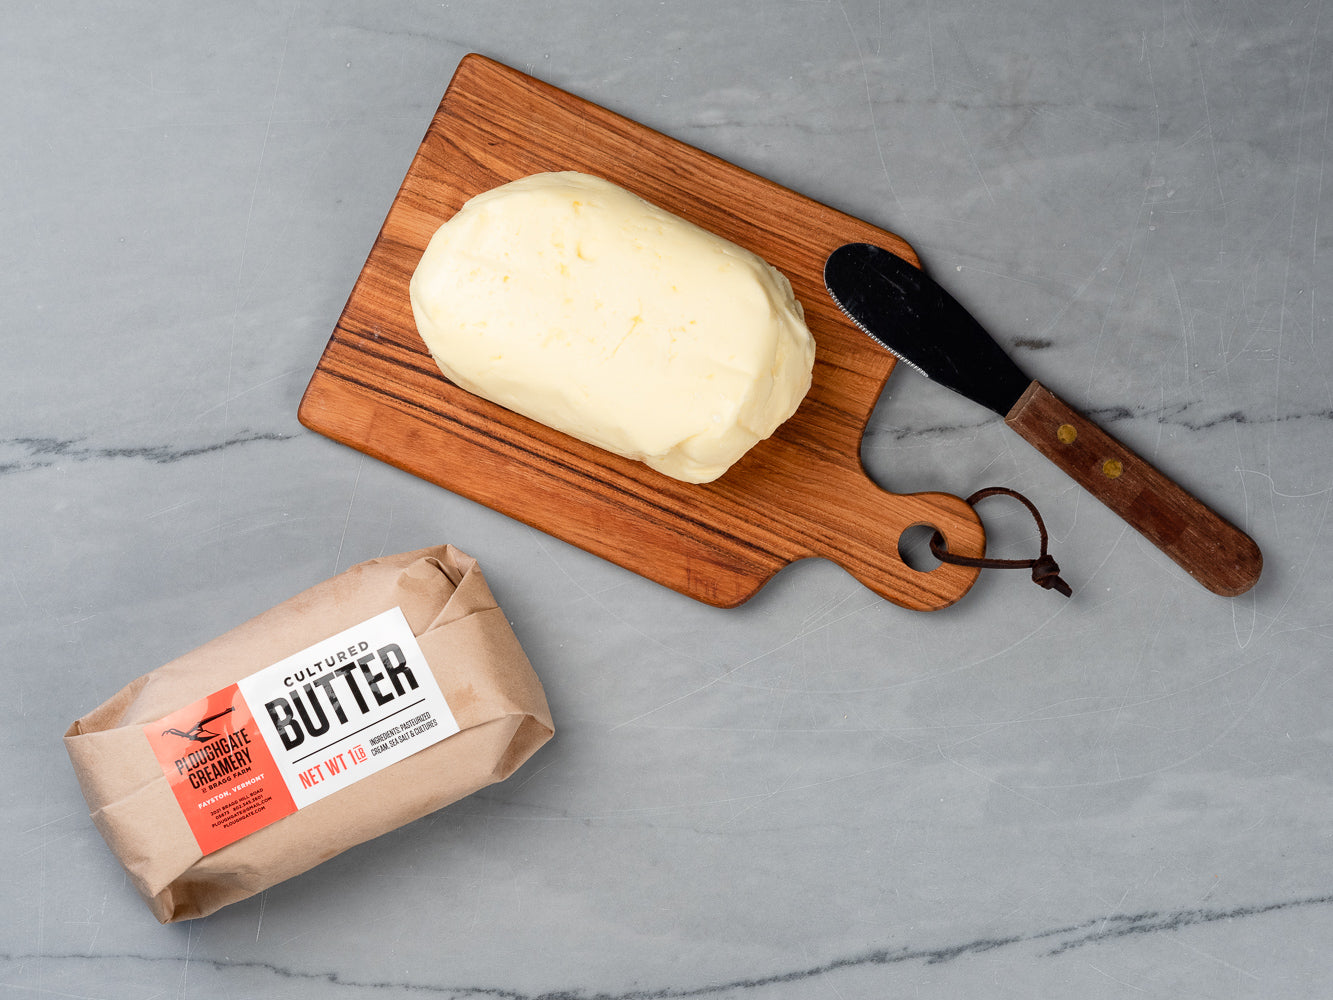 Ploughgate Butter from Saxelby Cheesemongers | handmade salted cultured cream butter | Heritage Foods